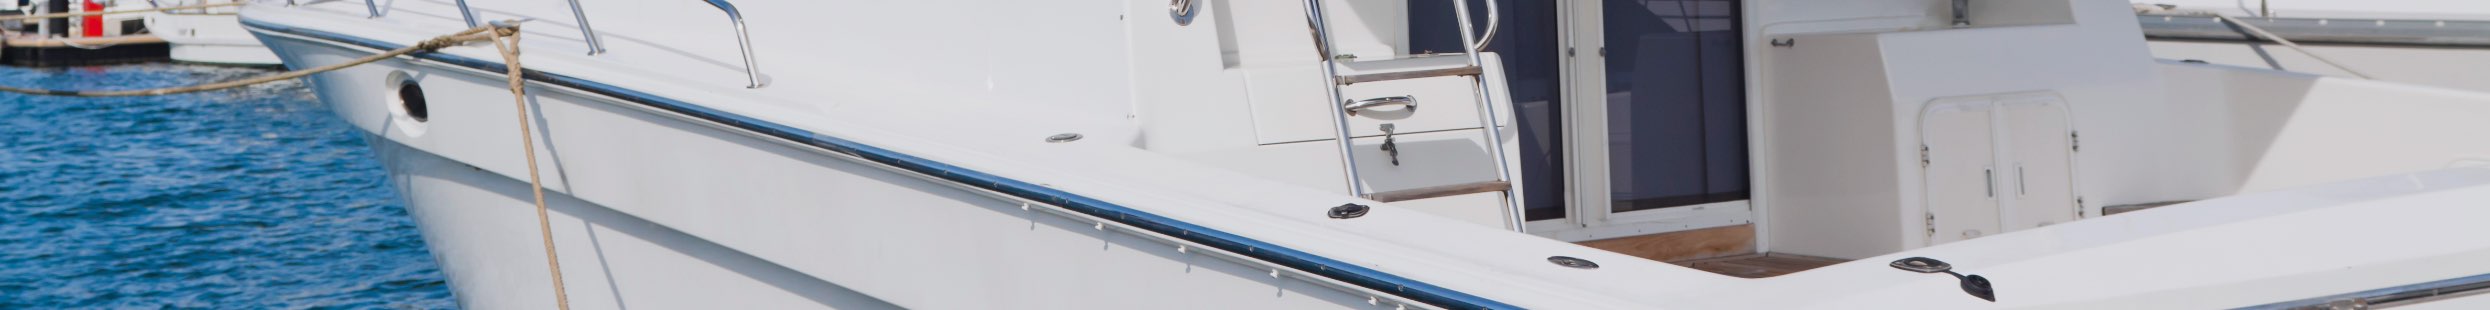 Boat Ladder Buying Guide: Tips for Choosing the Right Boarding